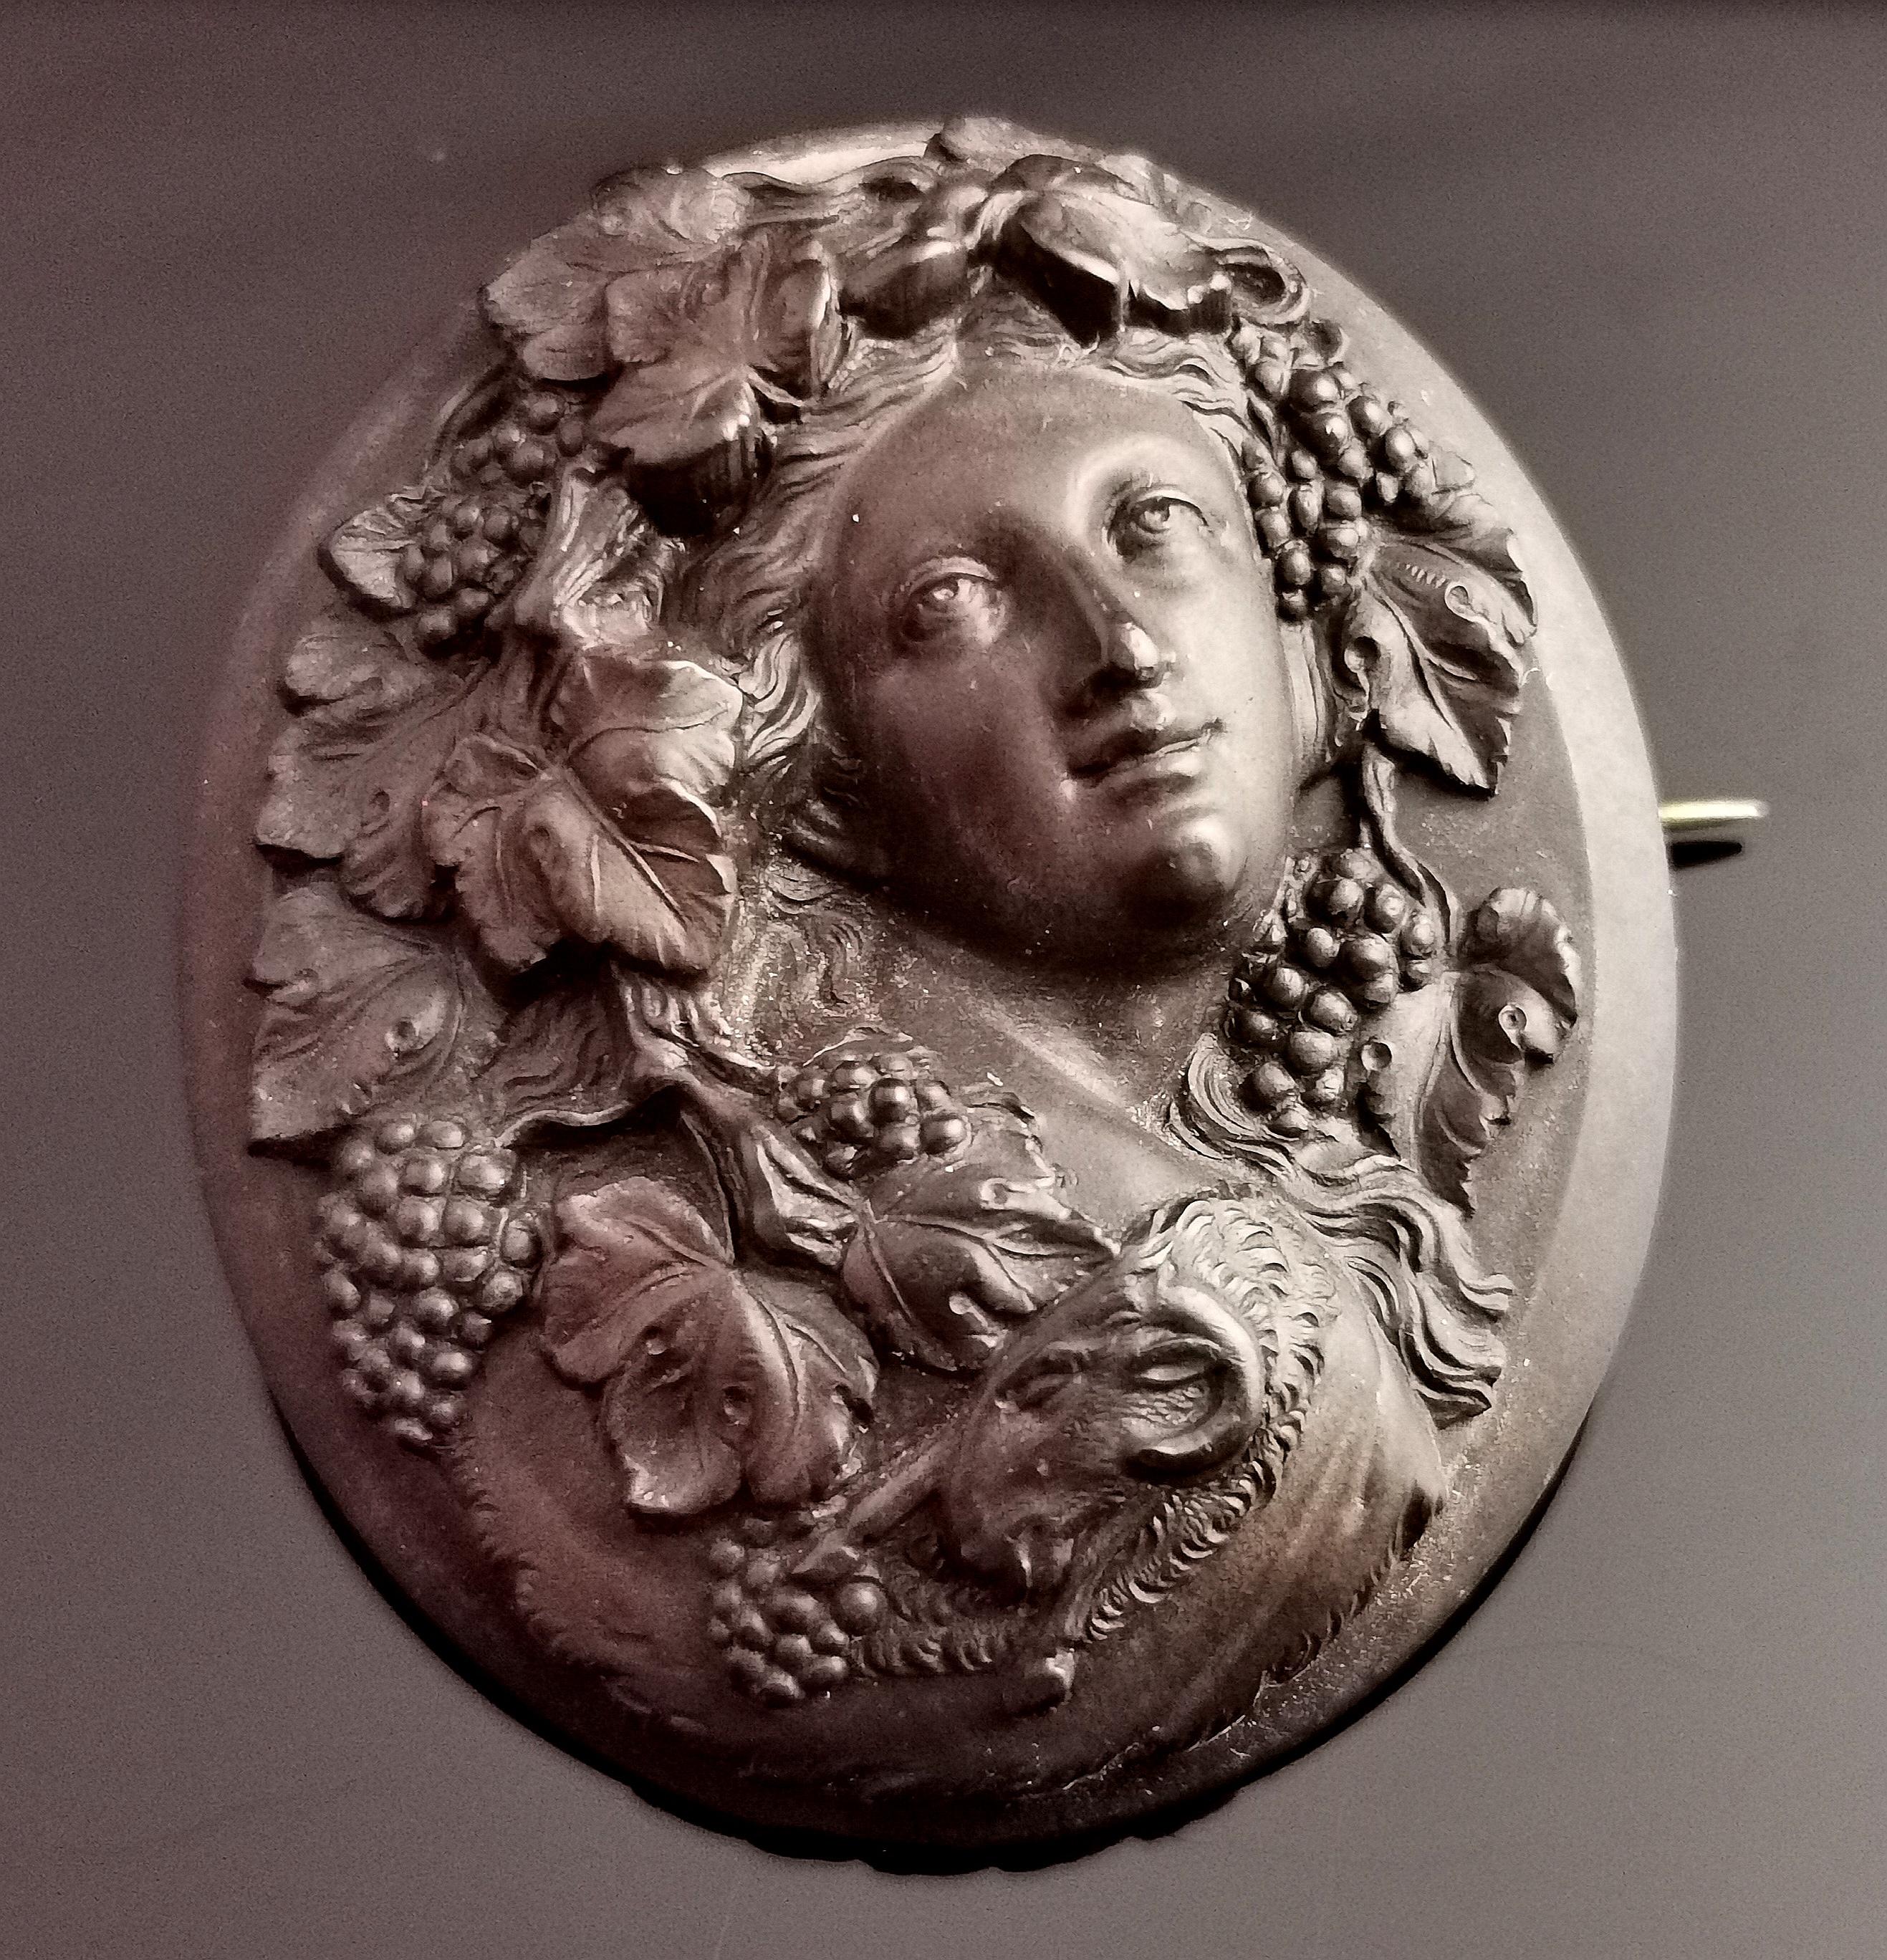 A beautiful antique Victorian Vulcanite cameo brooch.

It is a very finely designed brooch in high relief featuring the bust of a Bacchante.

Bacchante were considered to be the female followers of the Roman god of wine Bacchus.

This is a highly